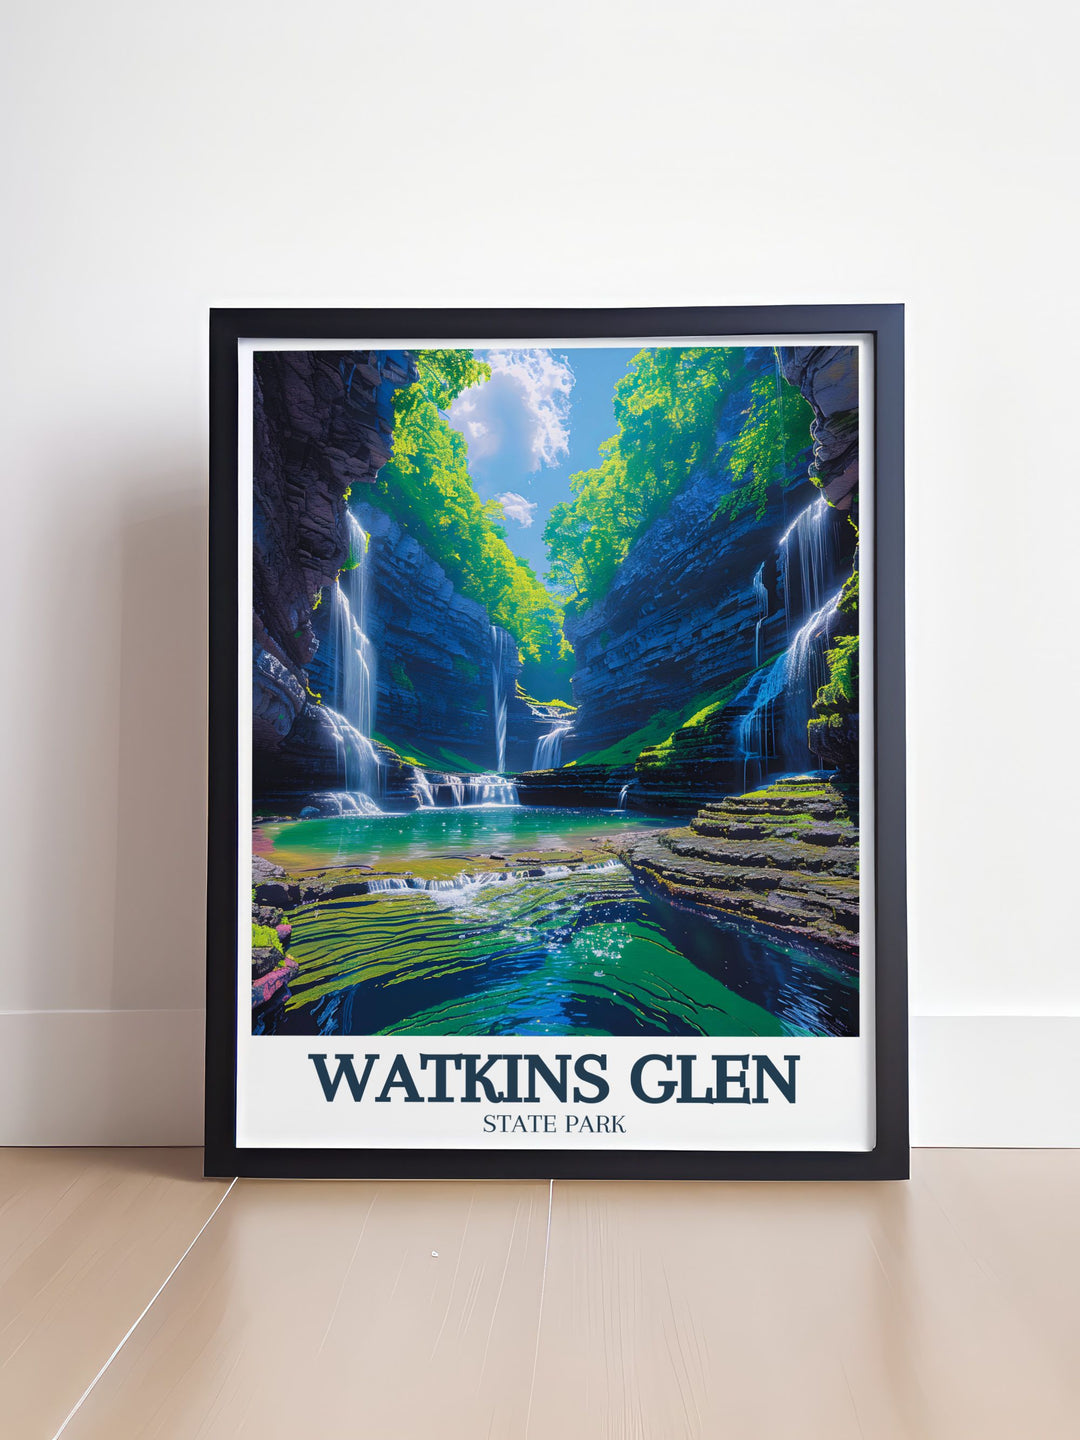 Add a touch of tranquility and history to your home with this Watkins Glen State Park wall decor. The artwork captures the essence of the parks scenic landscapes and geological features, making it a perfect piece for those who appreciate New Yorks natural and geological treasures. It blends art and history beautifully, offering a serene and elegant display.